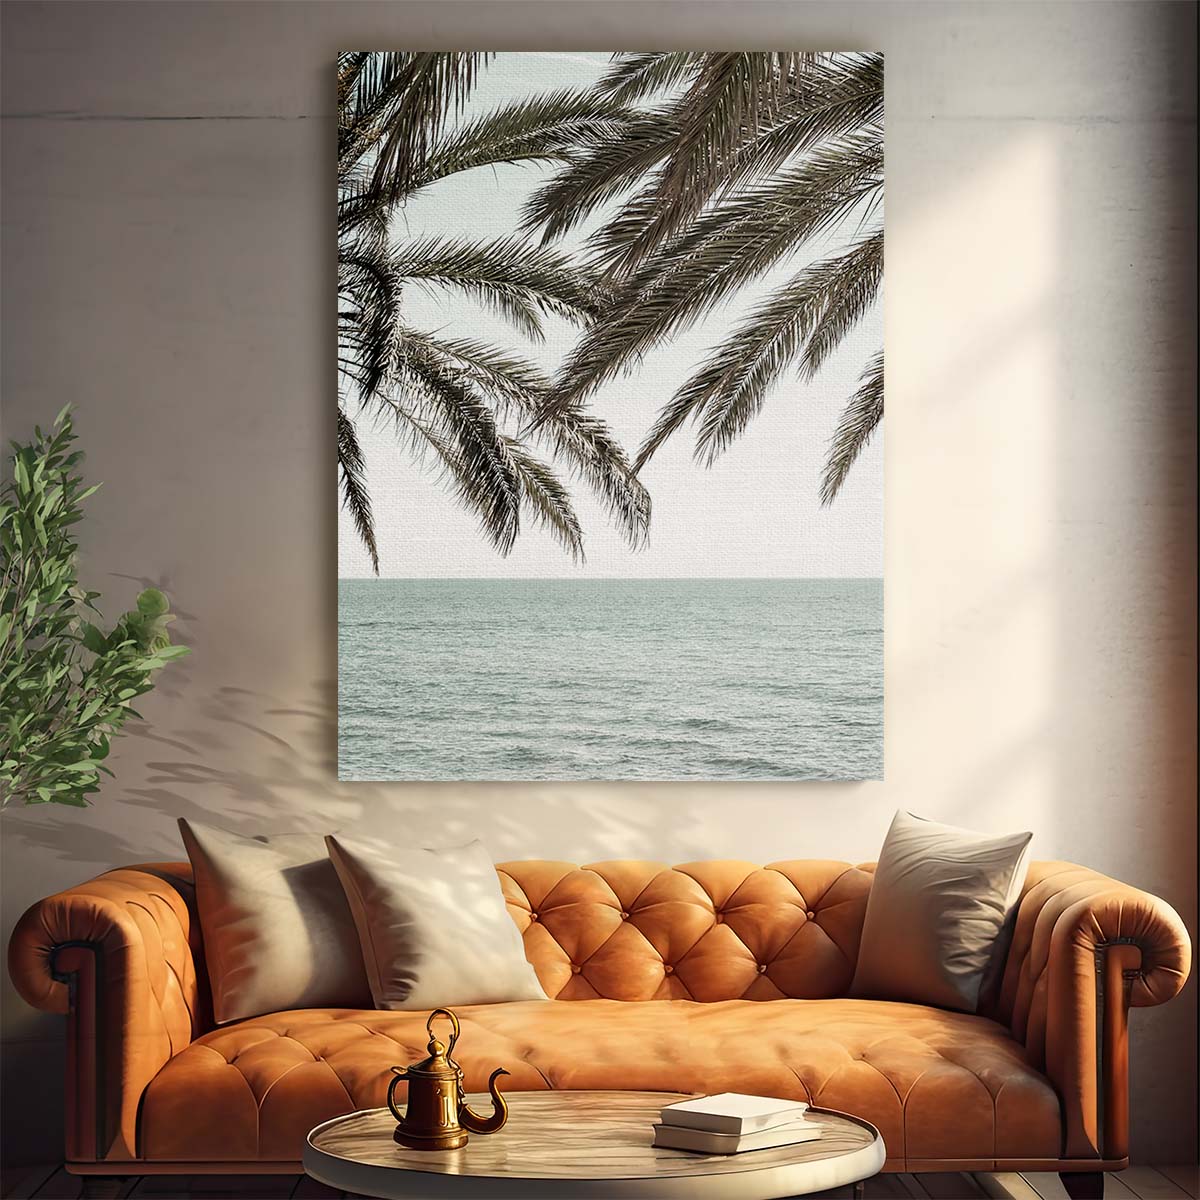 Exotic Tropical Palm Tree Beach Landscape Photography Art by Luxuriance Designs, made in USA